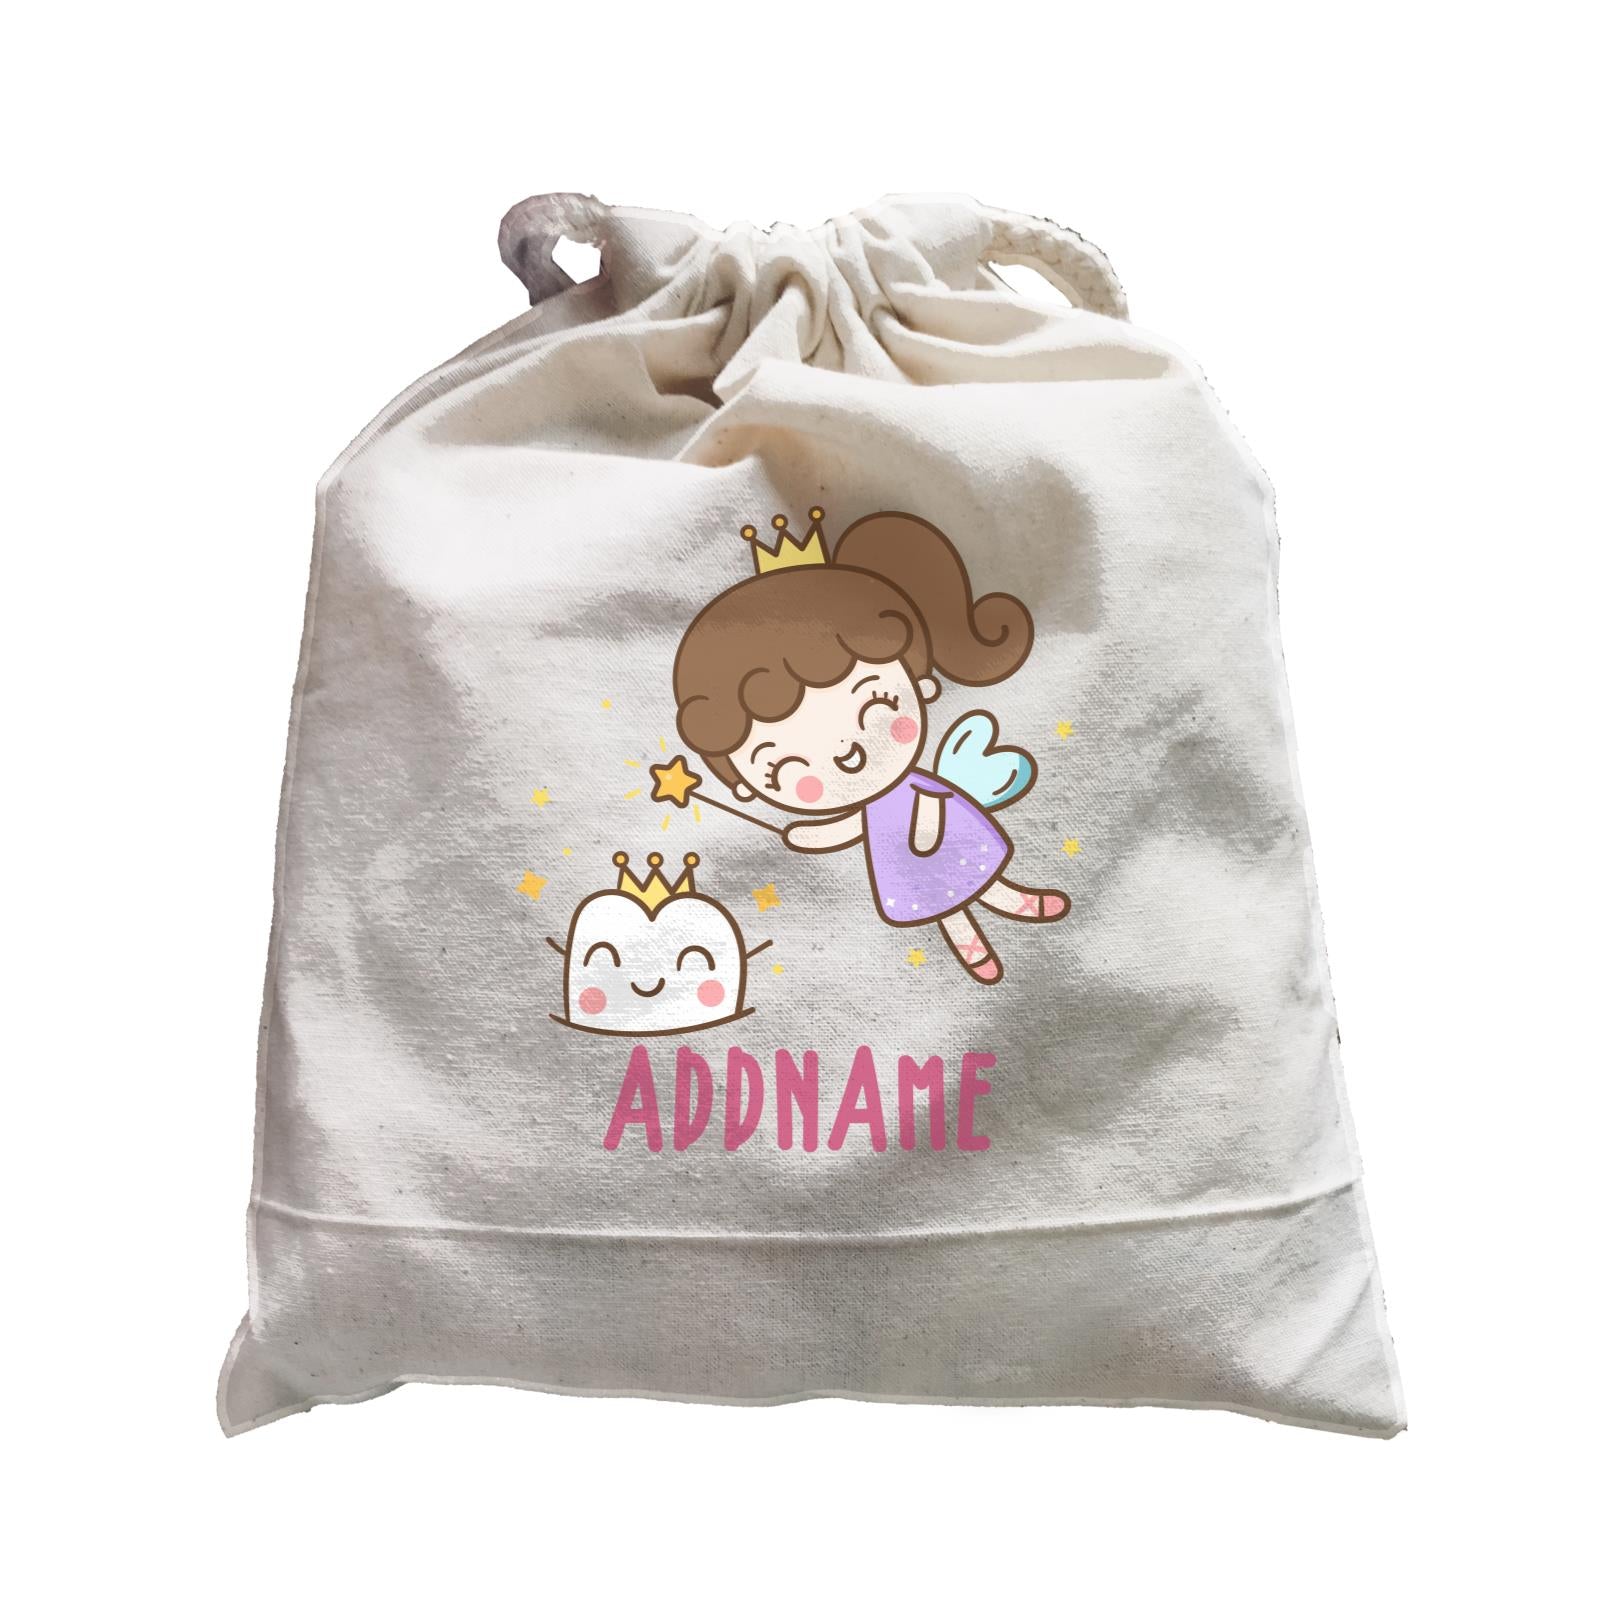 Unicorn And Princess Series Cute Tooth Fairy Addname Satchel